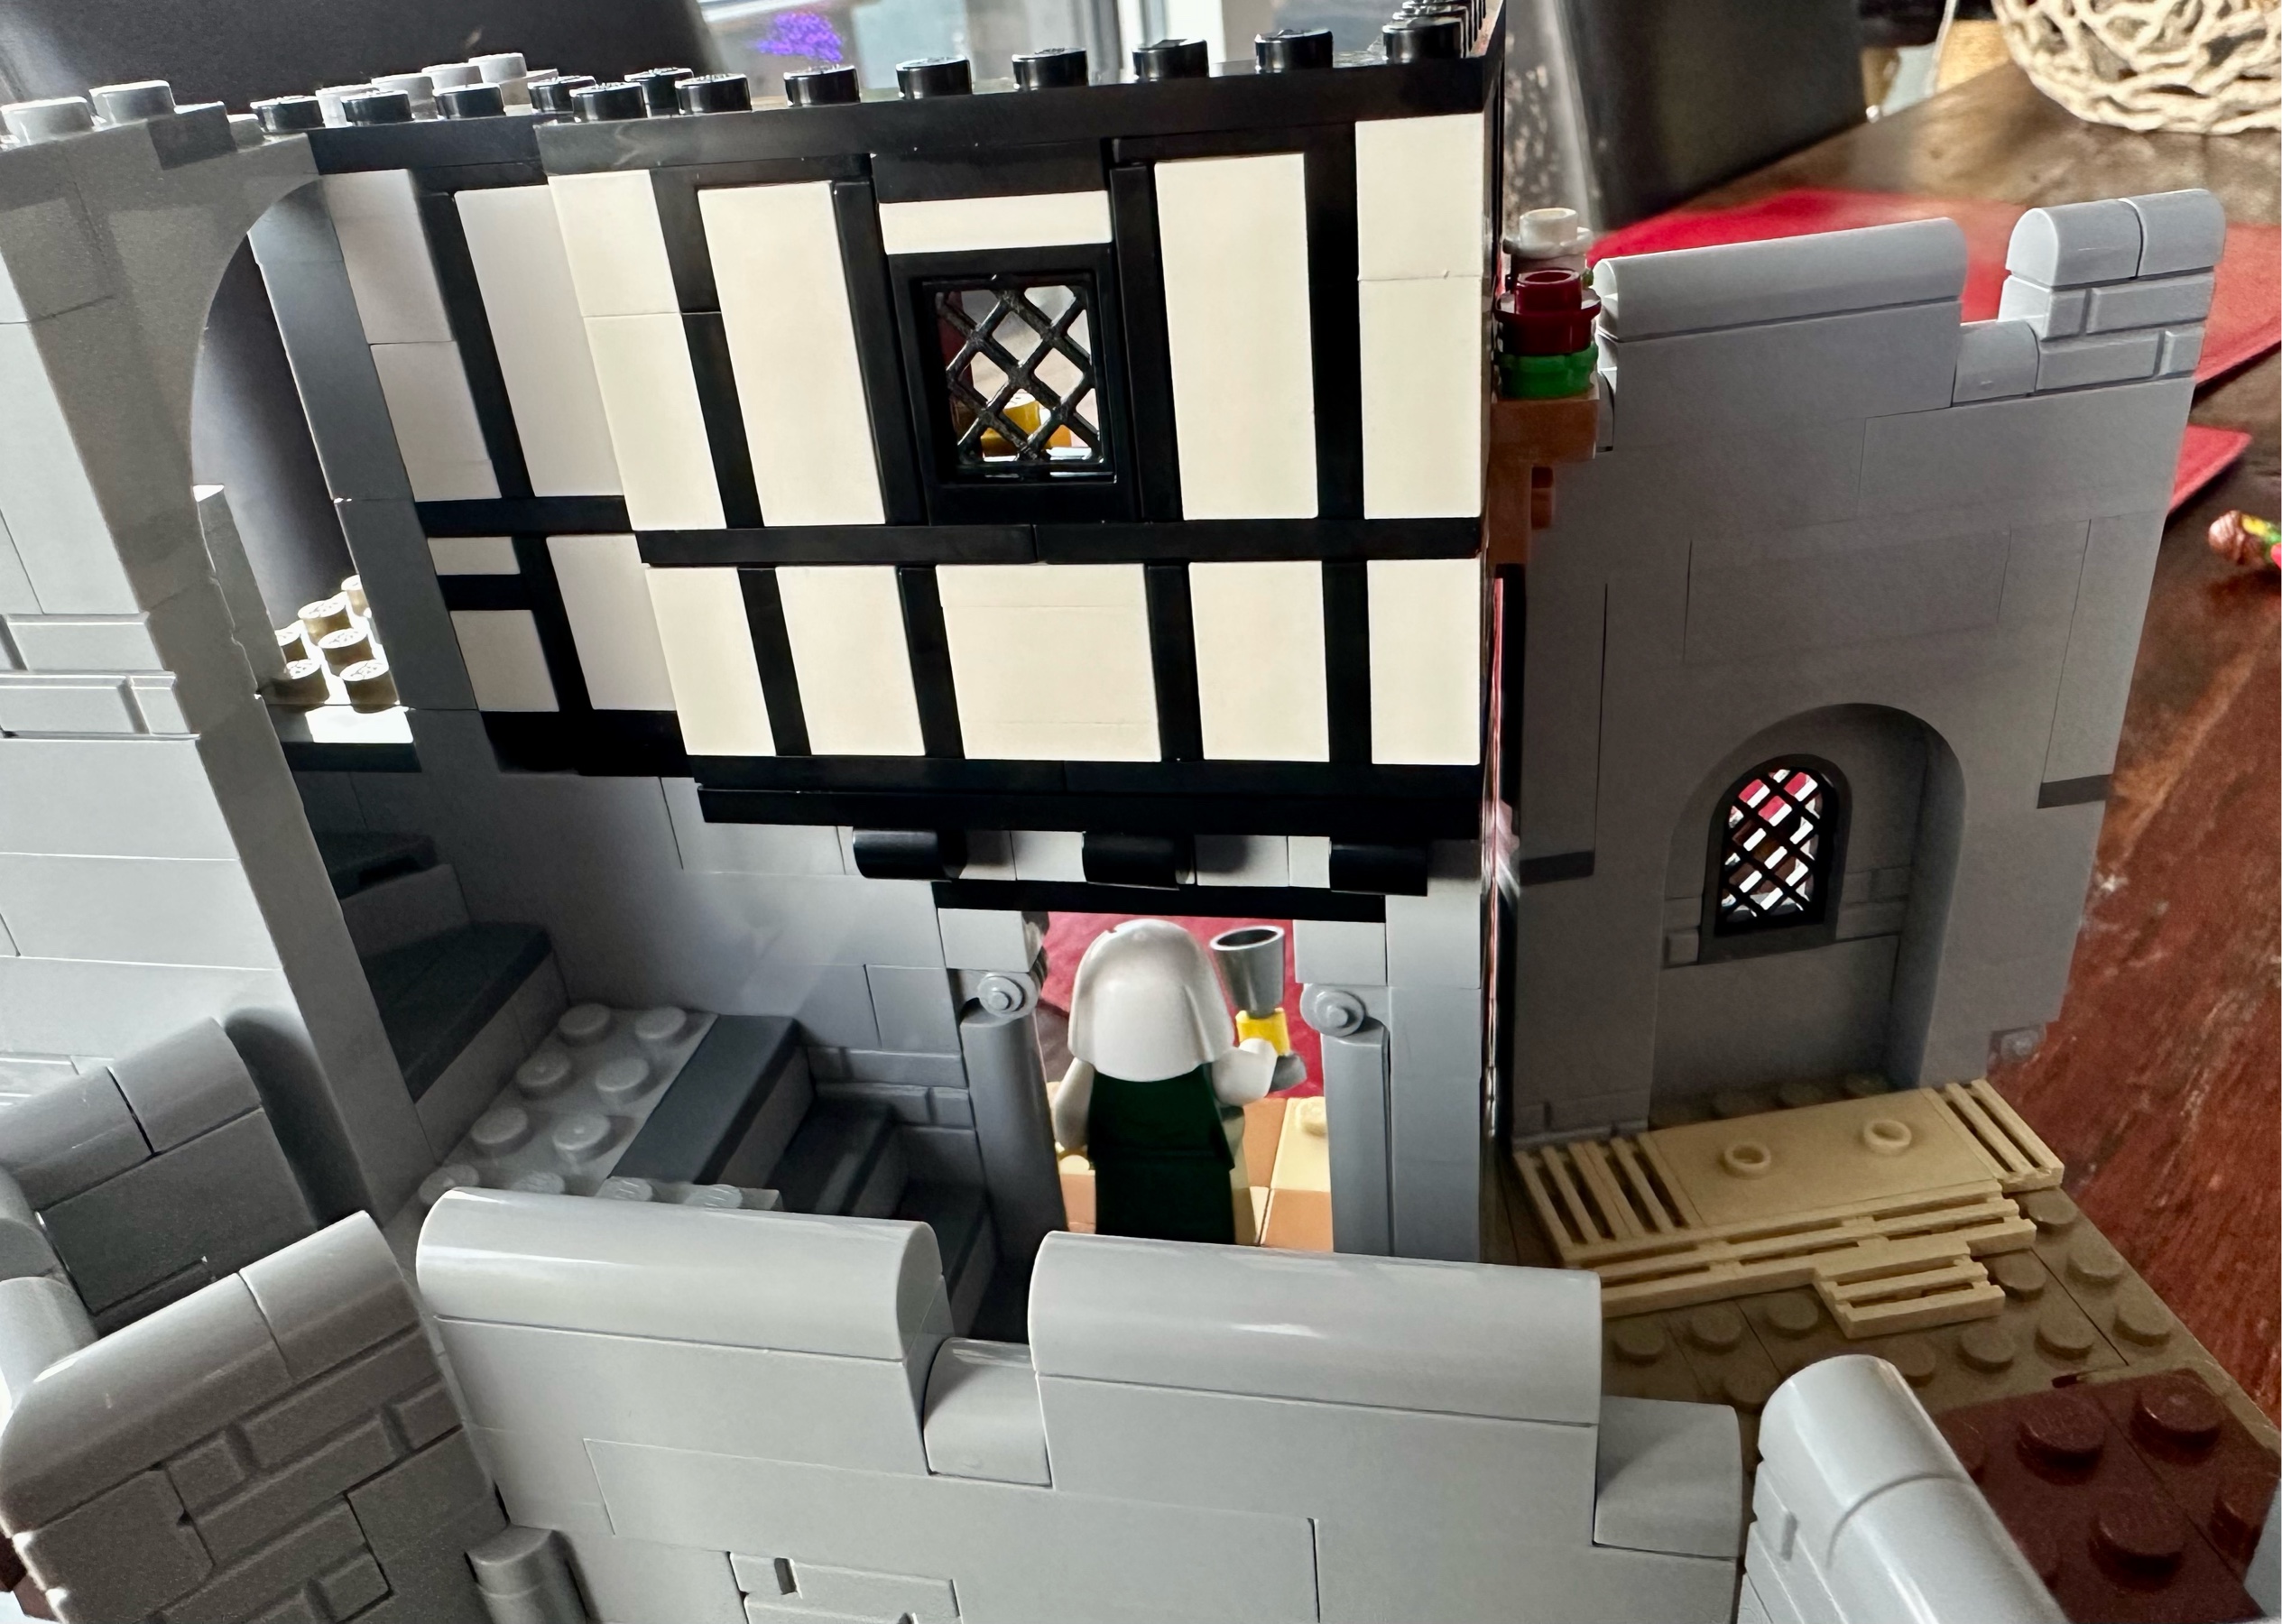 Exterior view of LEGO castle showing white plaster walls trimmed with black wood.